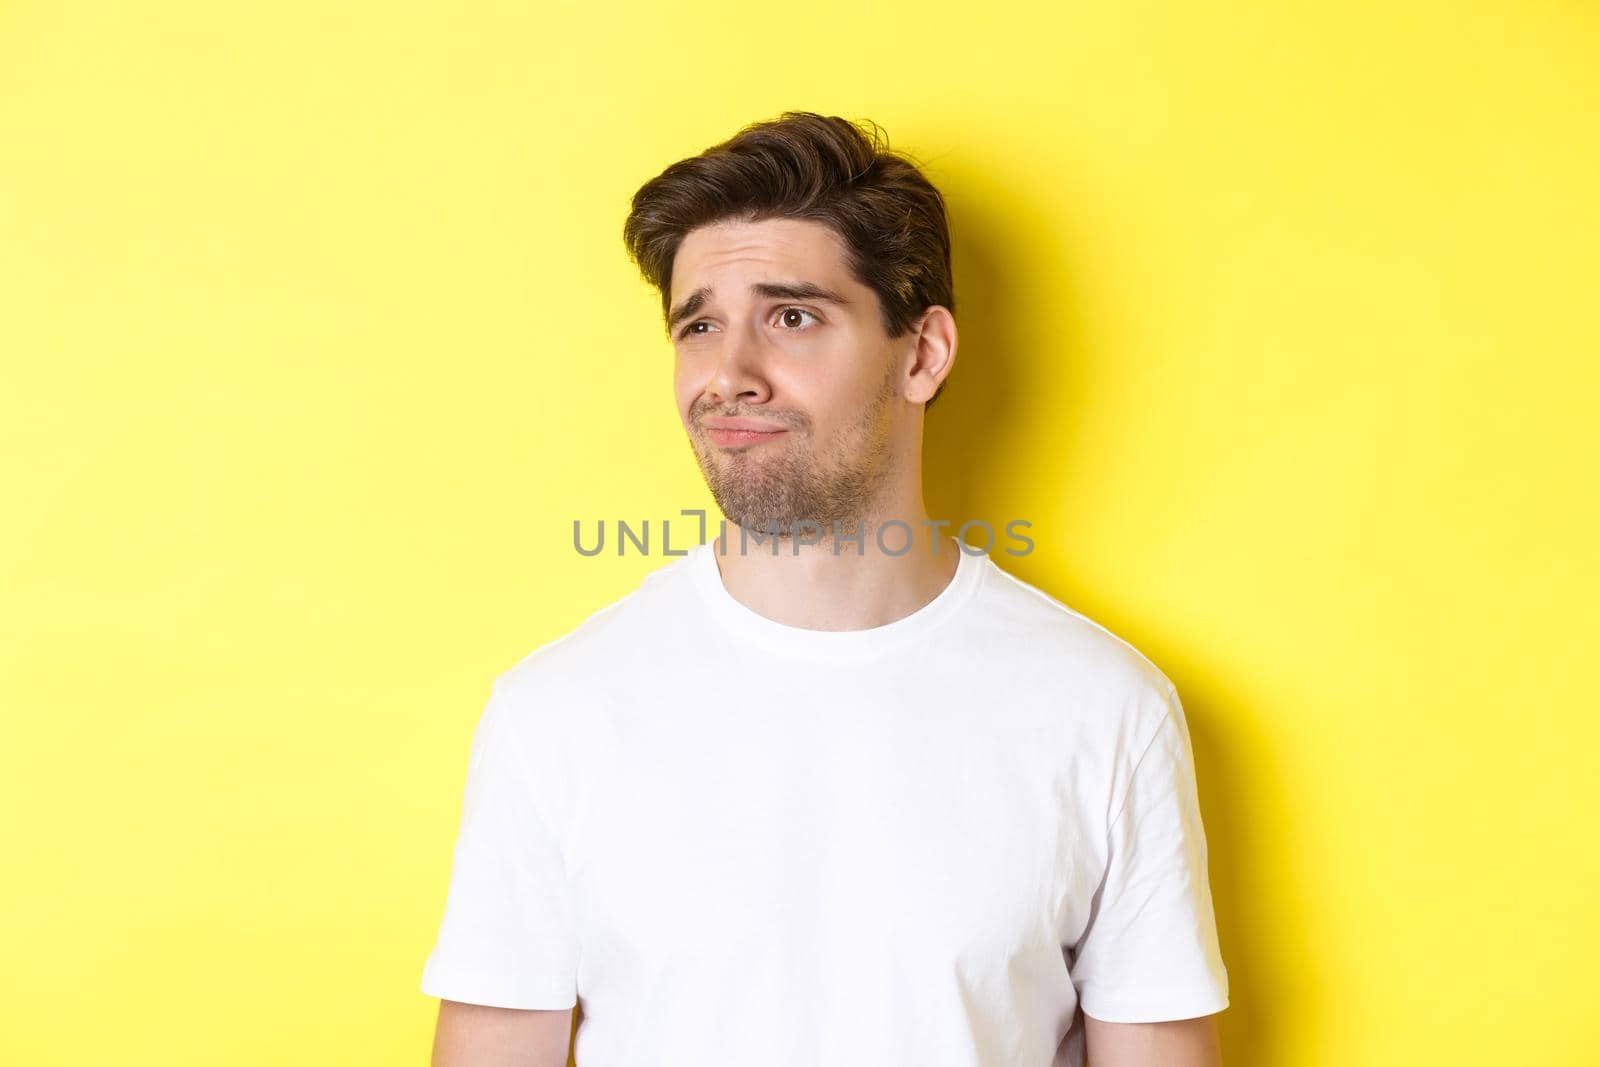 Reluctant guy in white t-shirt looking left, grimacing skeptical and displeased, standing over yellow background.